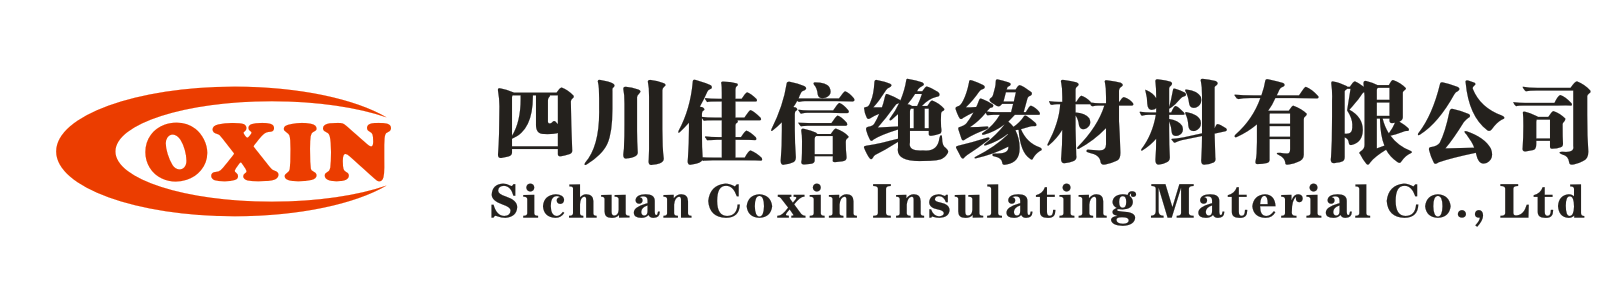 Sichuan Coxin Insulating Material Co., Ltd.